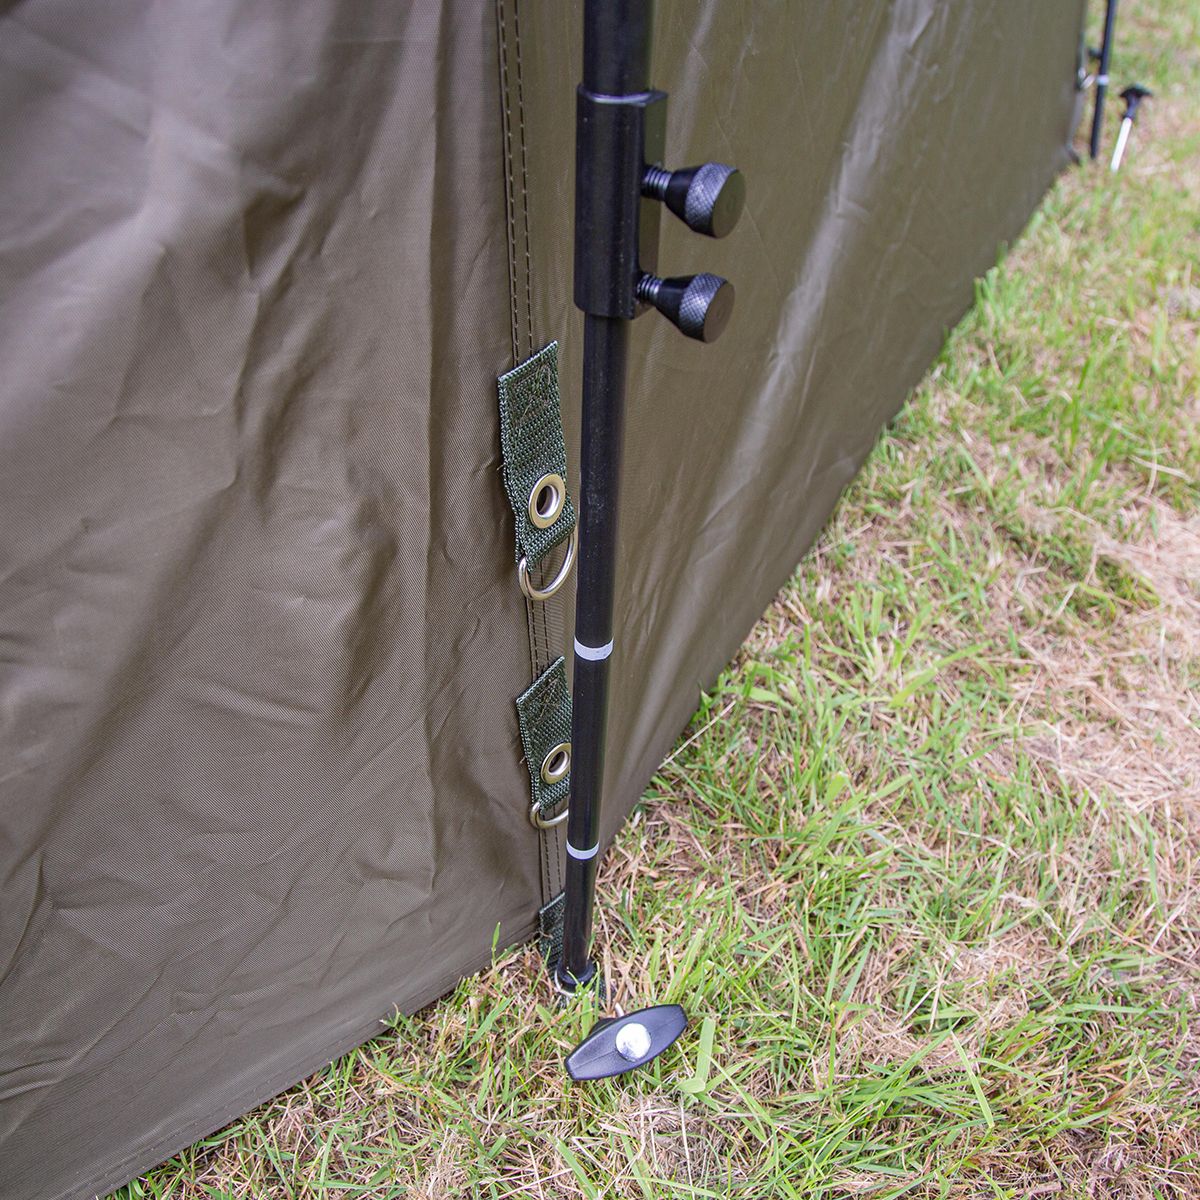 Extension Ultimate Bivvy & Brolly Extension